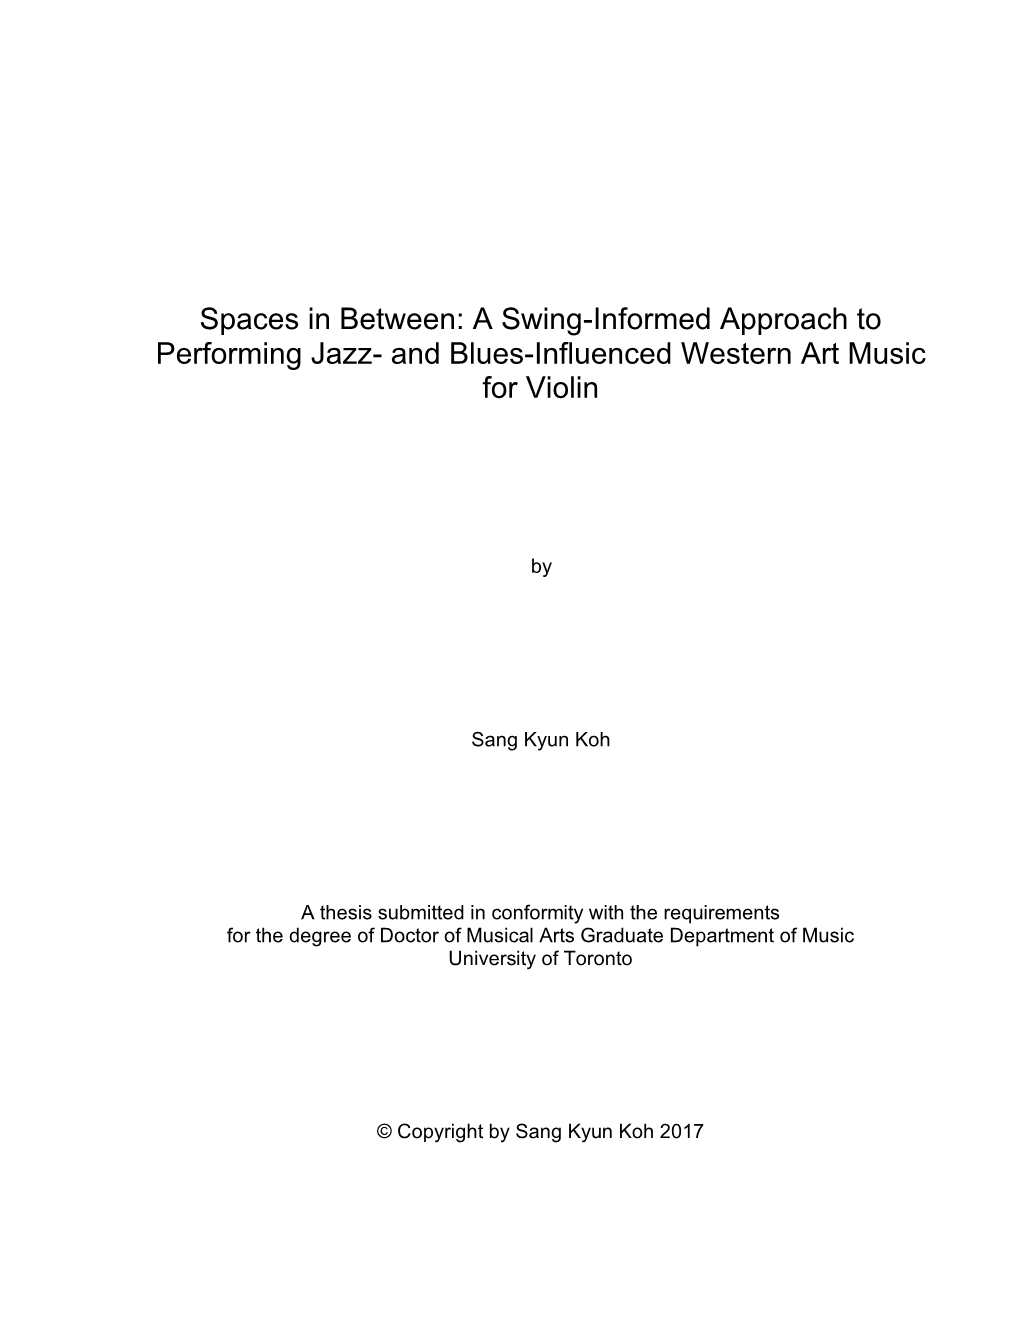 A Swing-Informed Approach to Performing Jazz- and Blues-Influenced Western Art Music for Violin